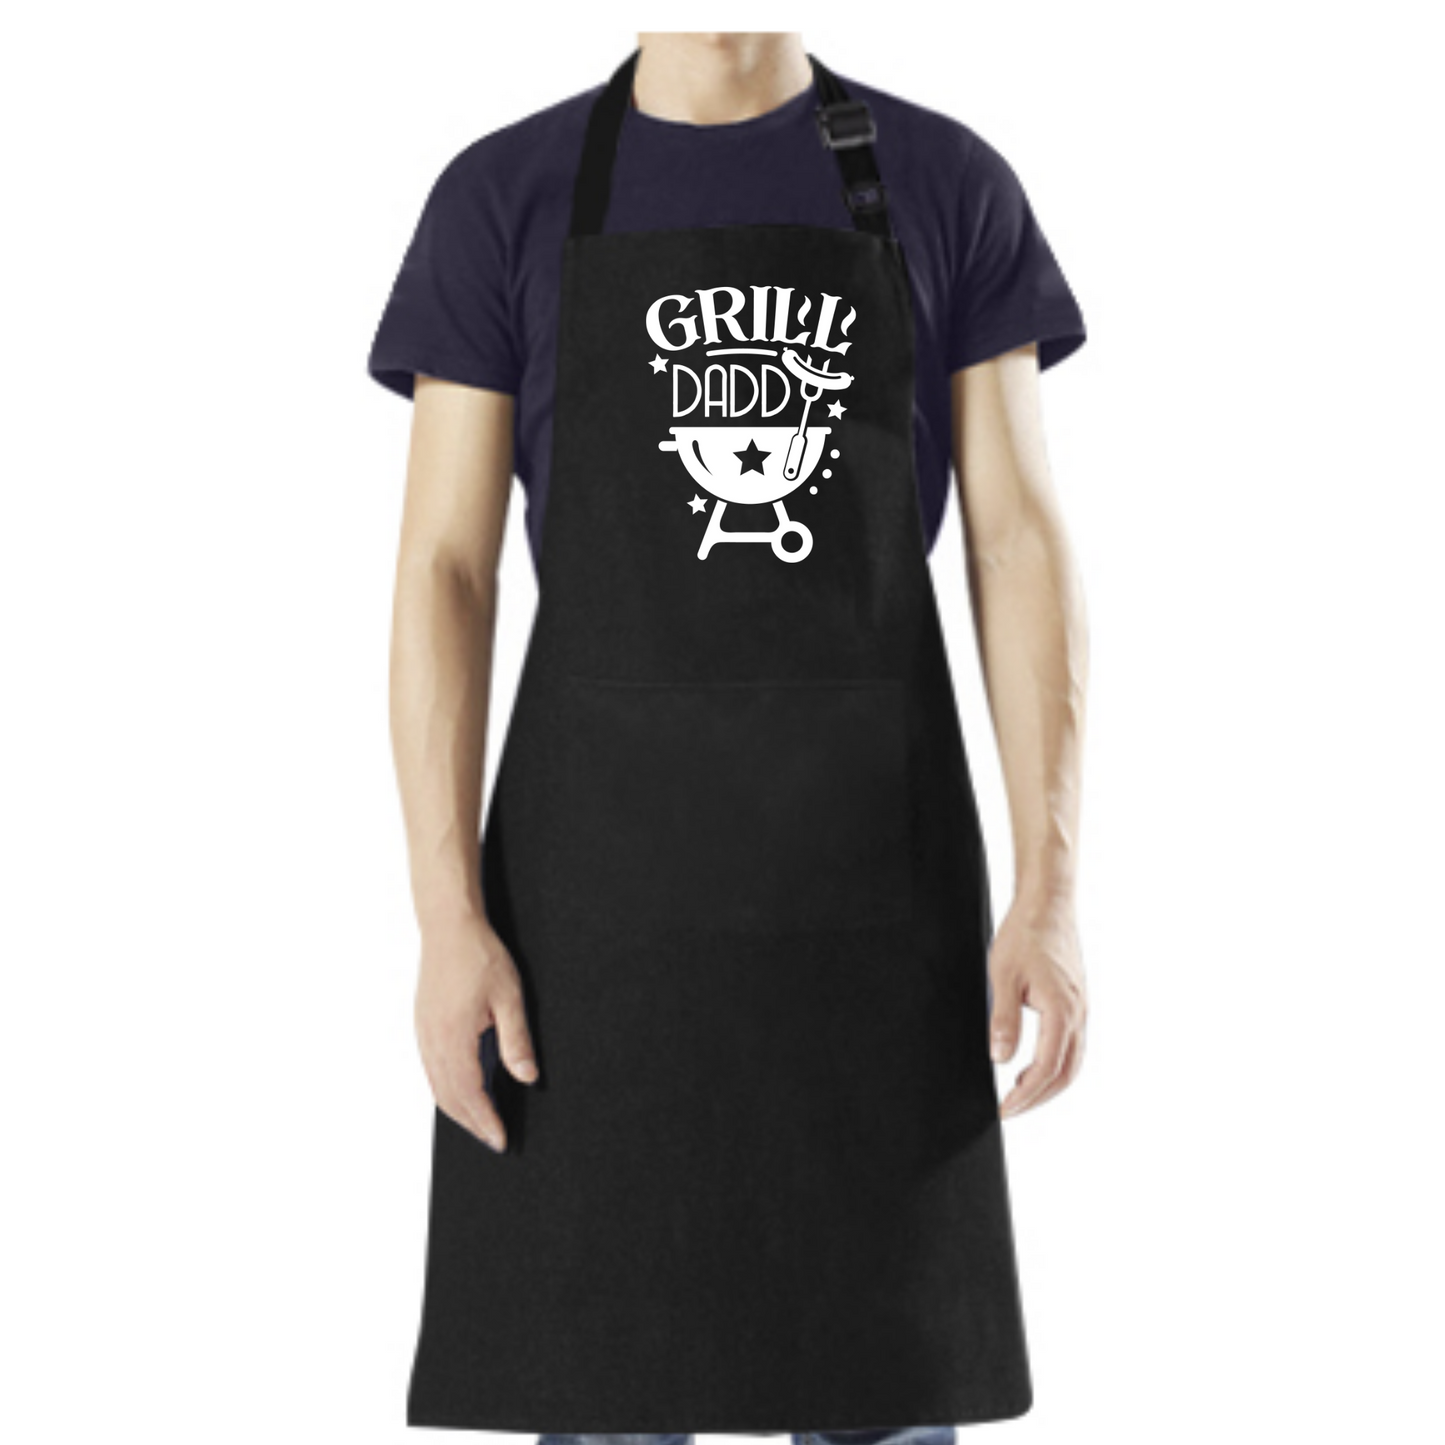 Grill Daddy - BBQ Apron Black, Blue, Wine, and White - Mister Snarky's